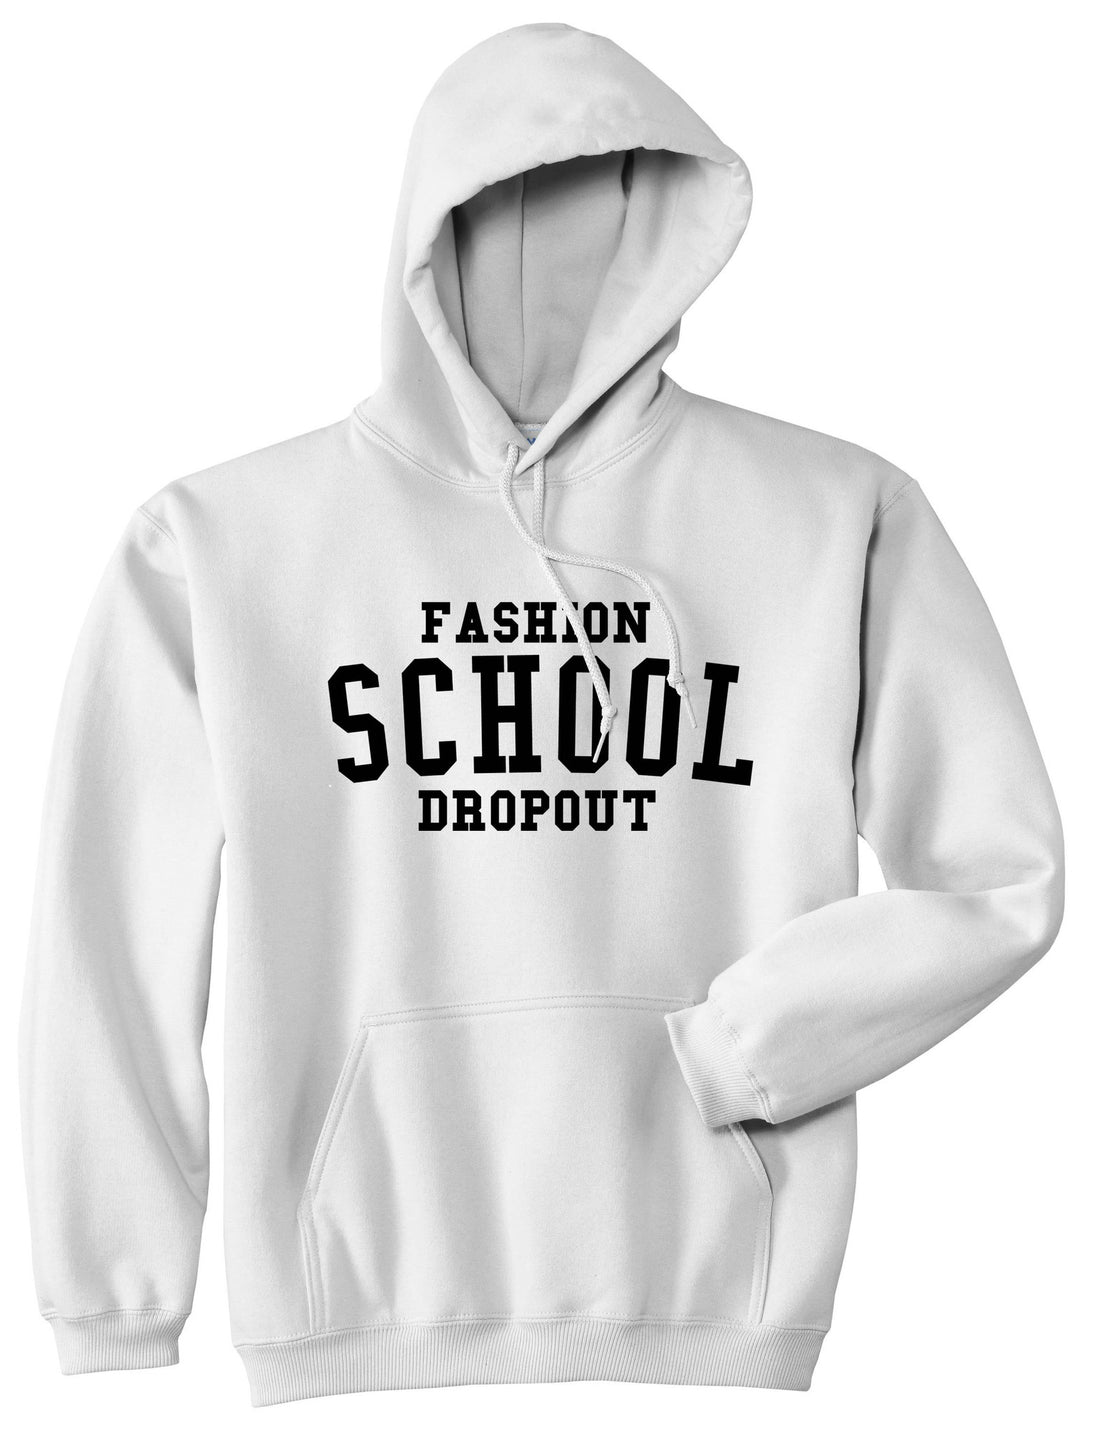 Fashion School Dropout Blogger Boys Kids Pullover Hoodie Hoody in White By Kings Of NY